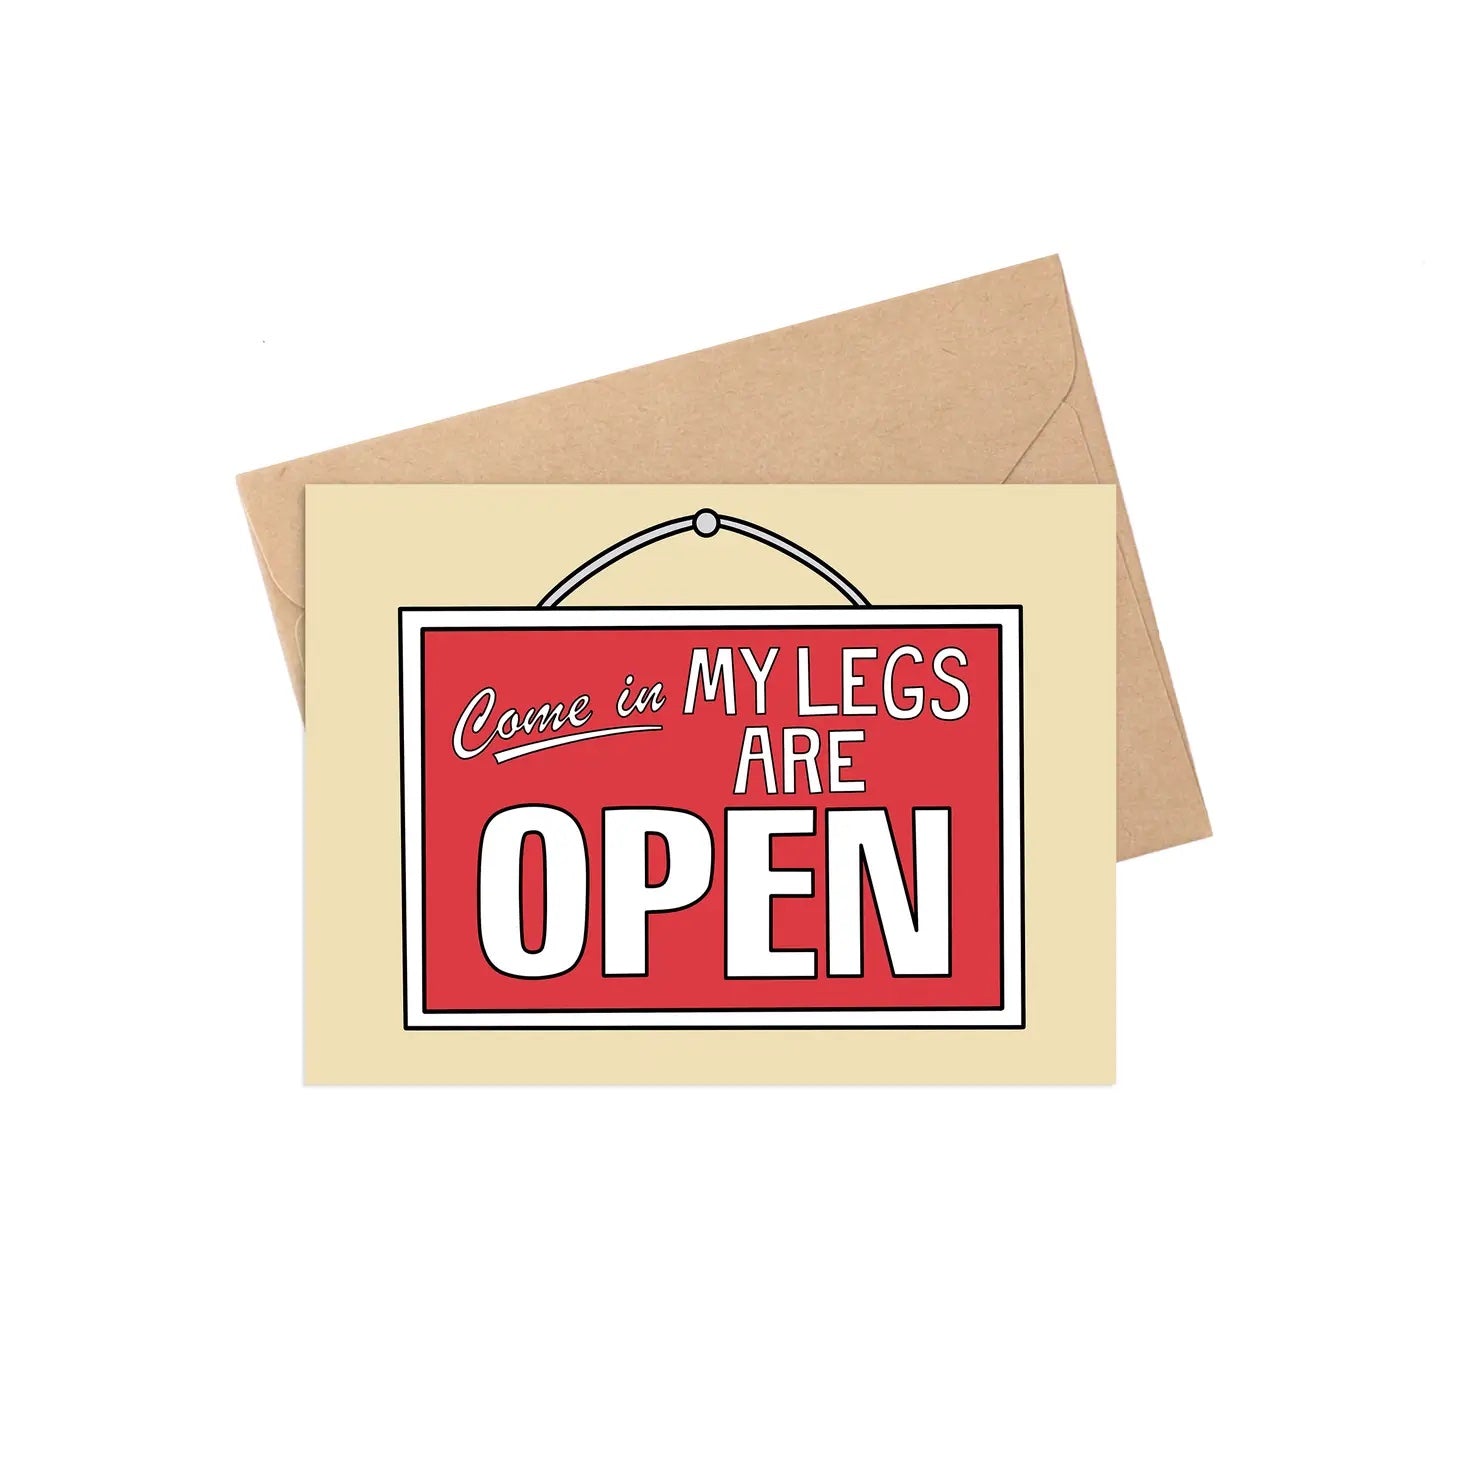 Legs Are Open Valentine's Day Greeting Card